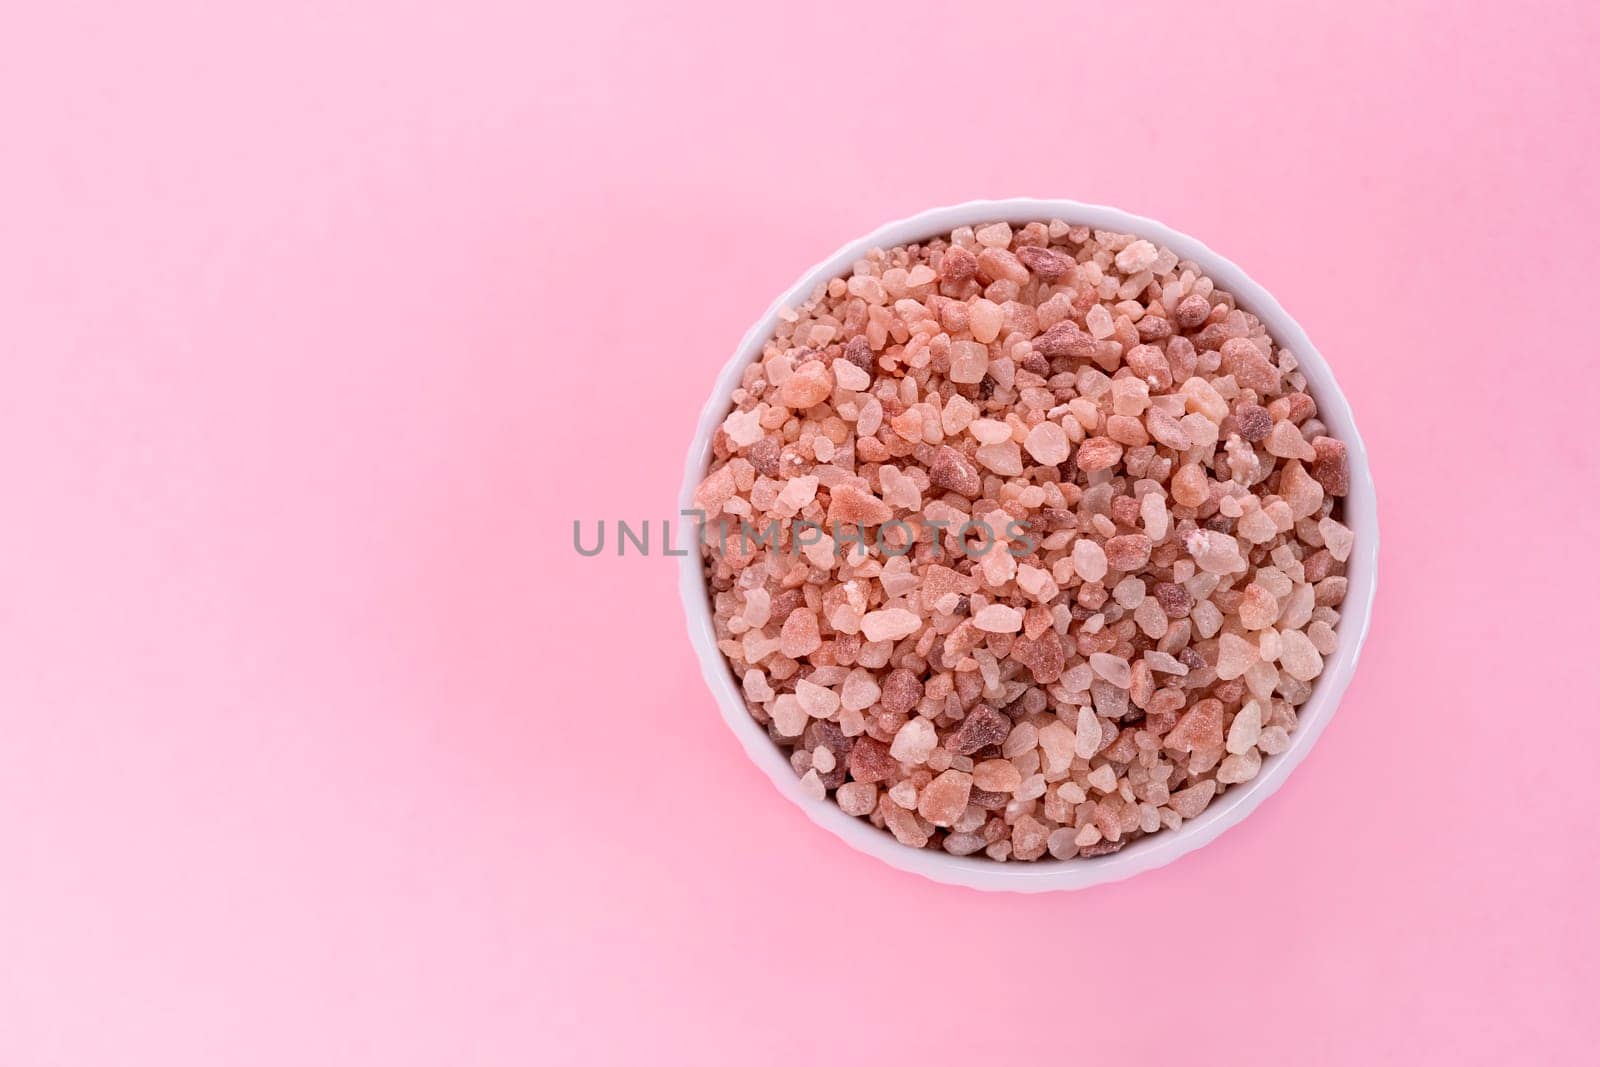 Mockup Pink Himalayan Rock Salt, Halite In White Ceramic Bowl On Pink Background. Top View Horizontal Plane, Copy Space For Text. High quality photo.